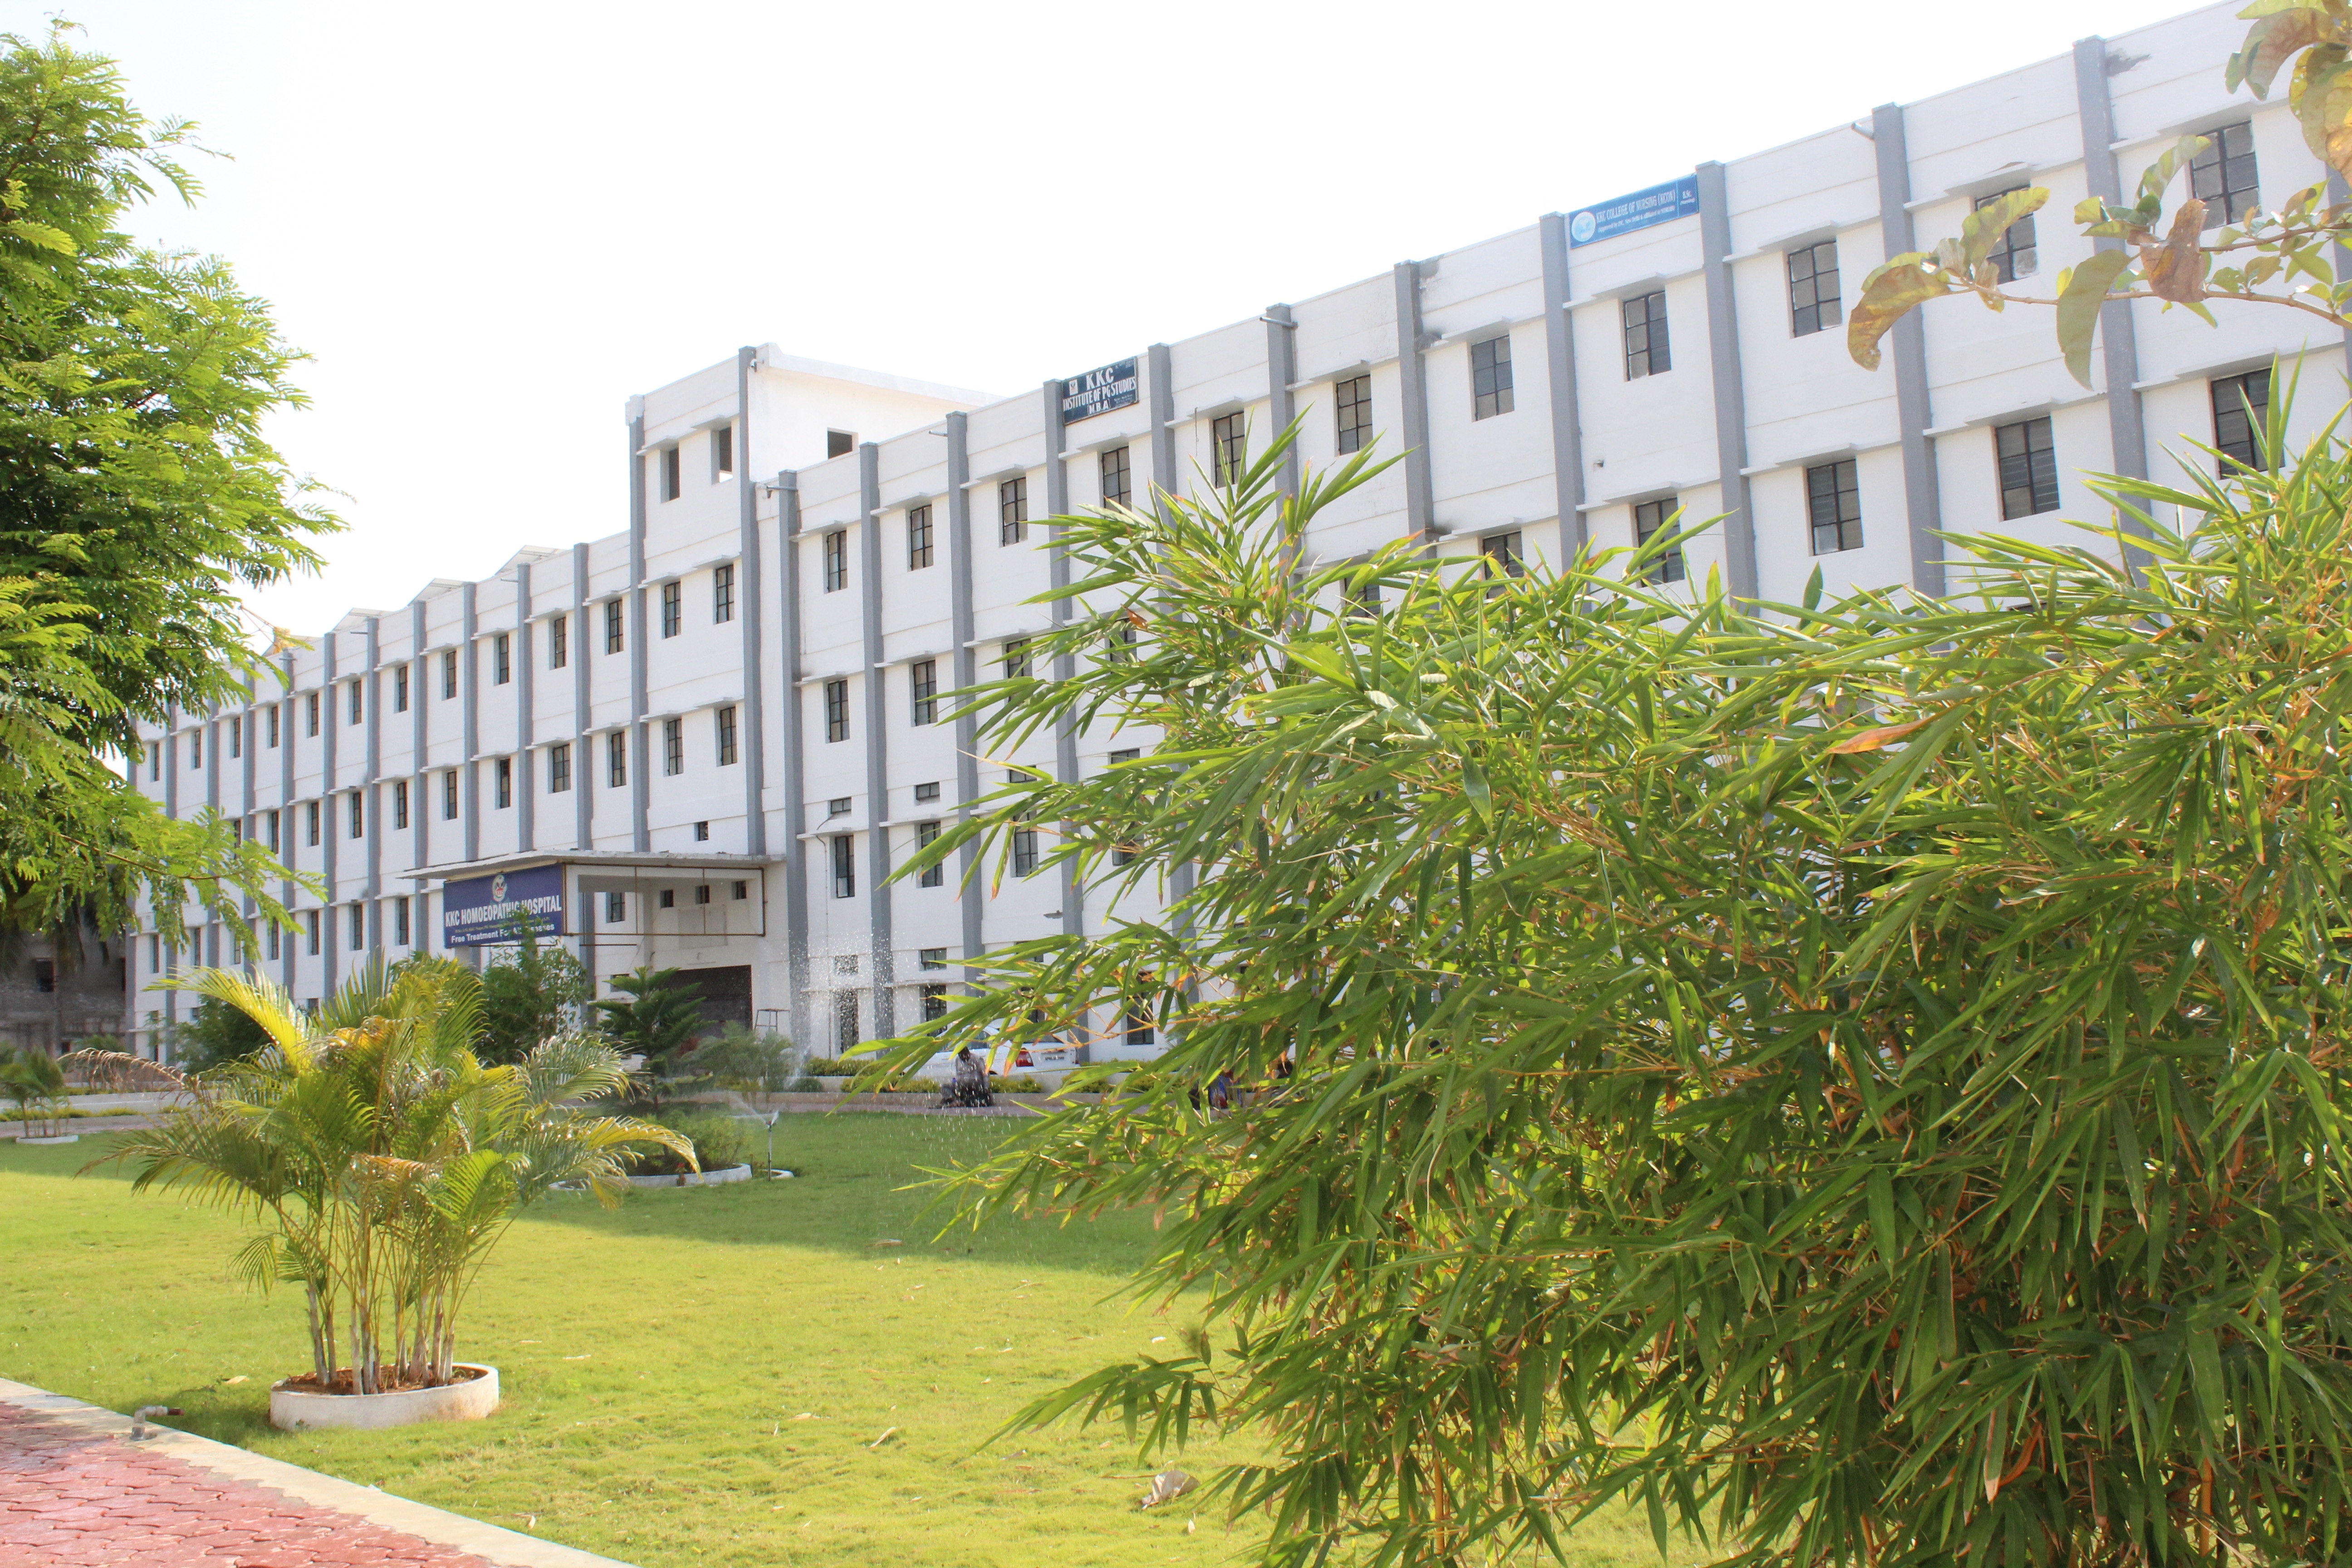 Campus with positive & hopeful atmosphere & quality care